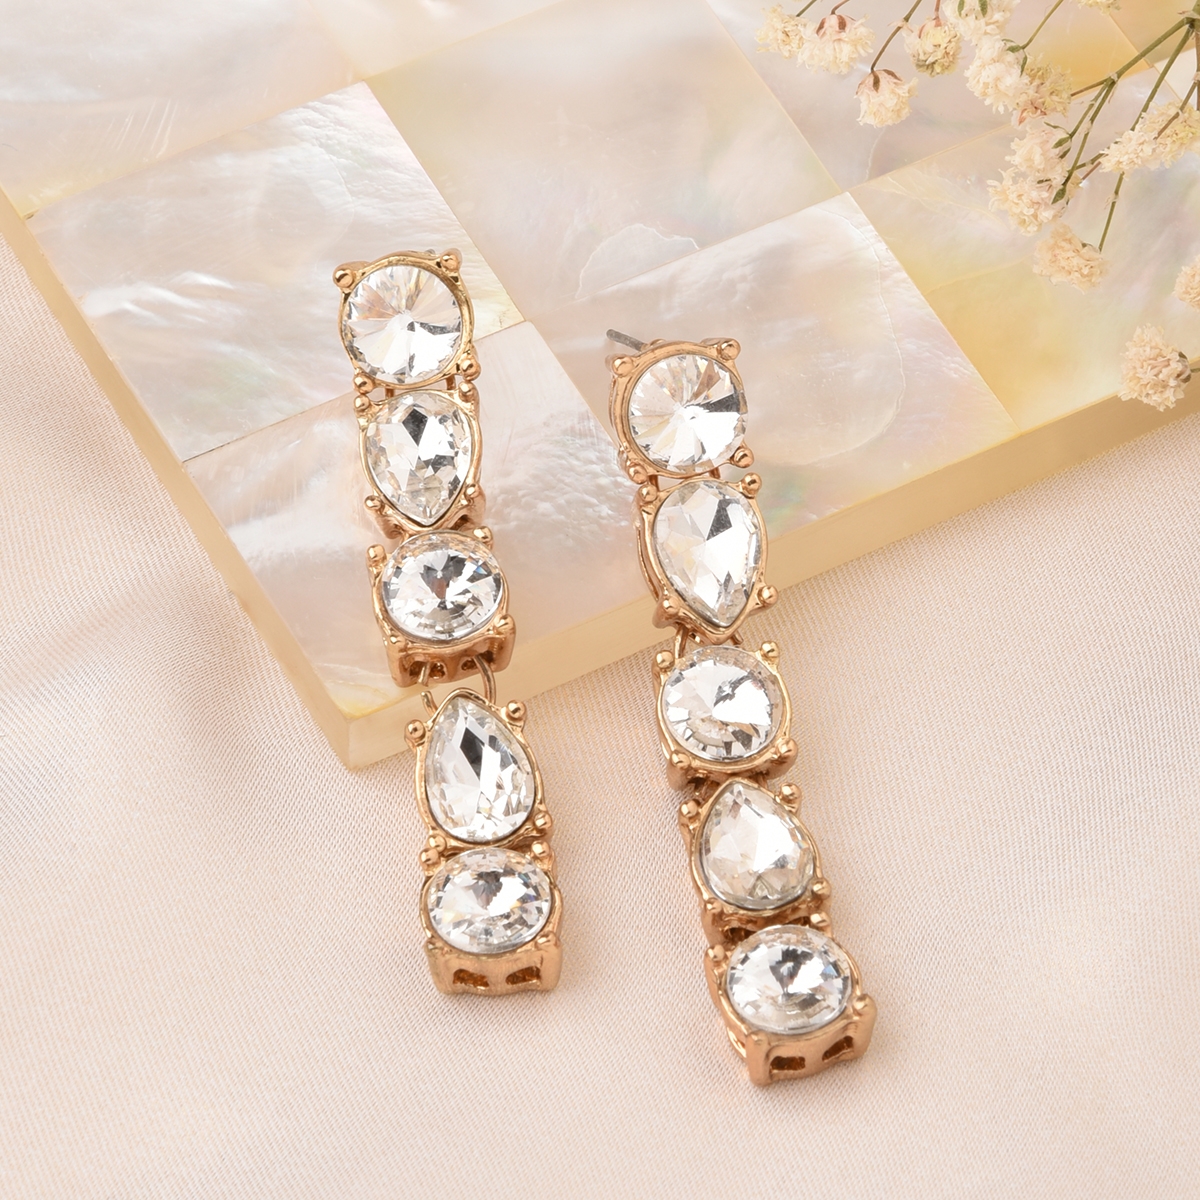 Lilly & sparkle | Lilly & Sparkle Gold Toned White Stone Studded Statement Dangler Earrings 0